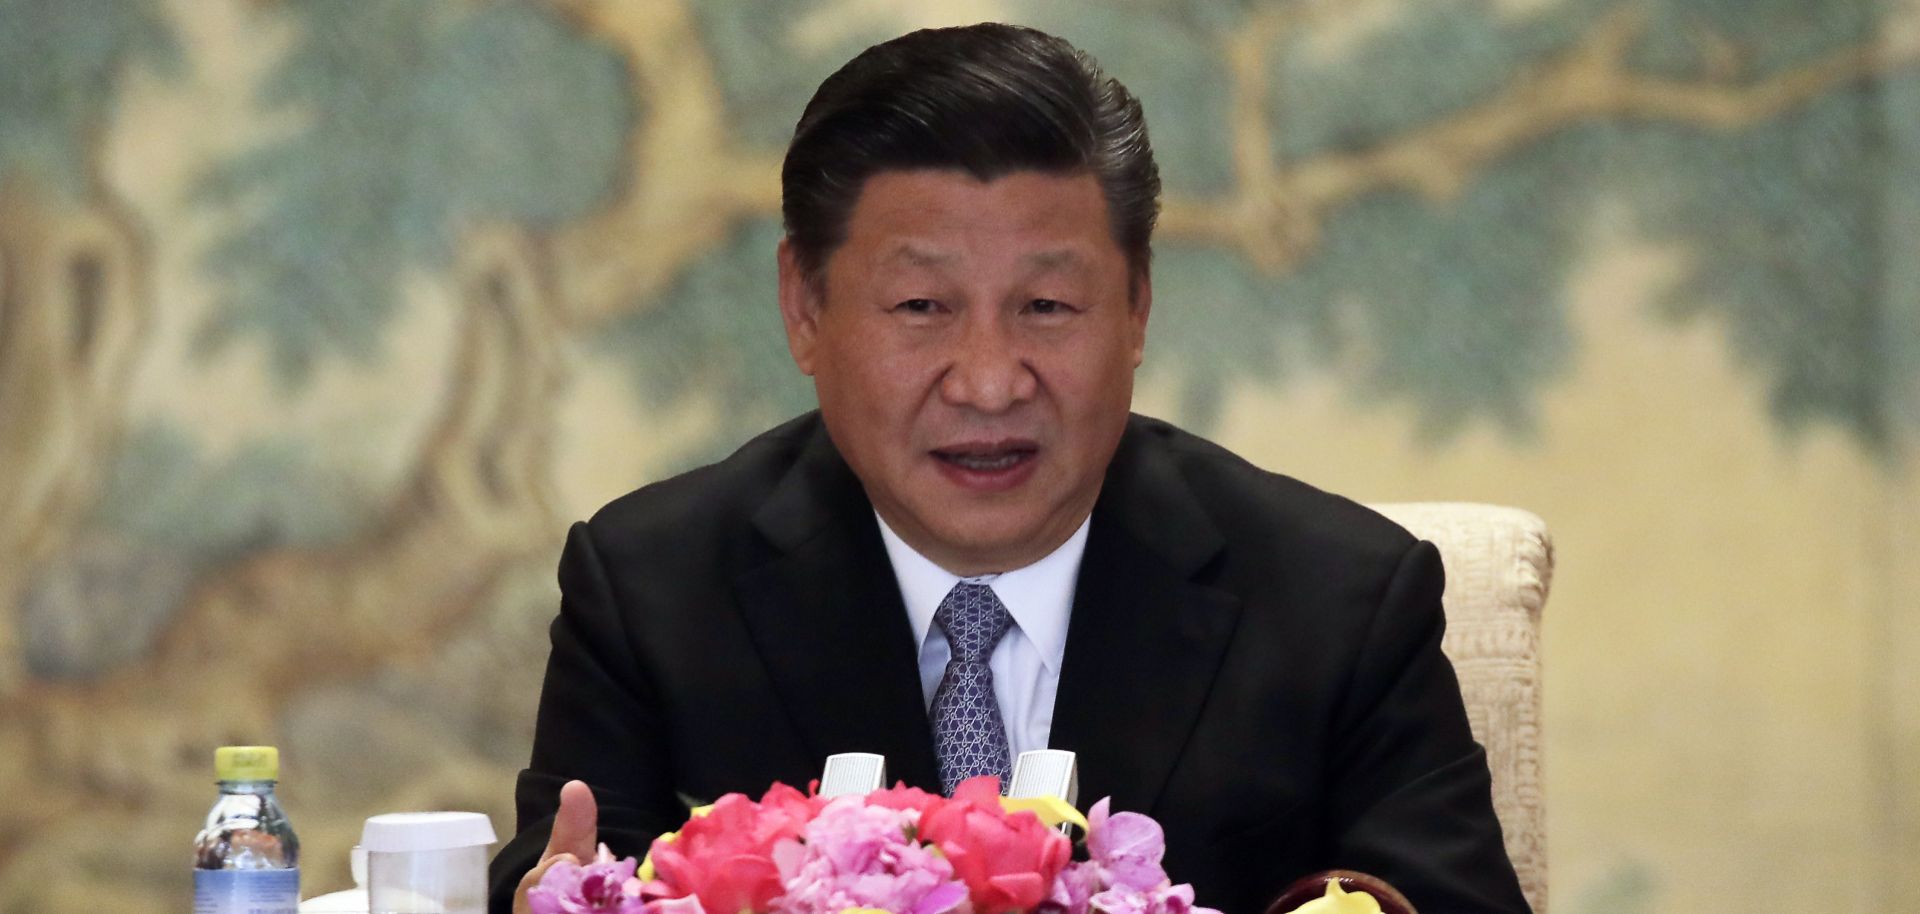 Chinese President Xi Jinping delivers his opening remarks to the members of the global chief executive committee during the roundtable summit at the Diaoyutai State Guesthouse in Beijing, China, June 21. 